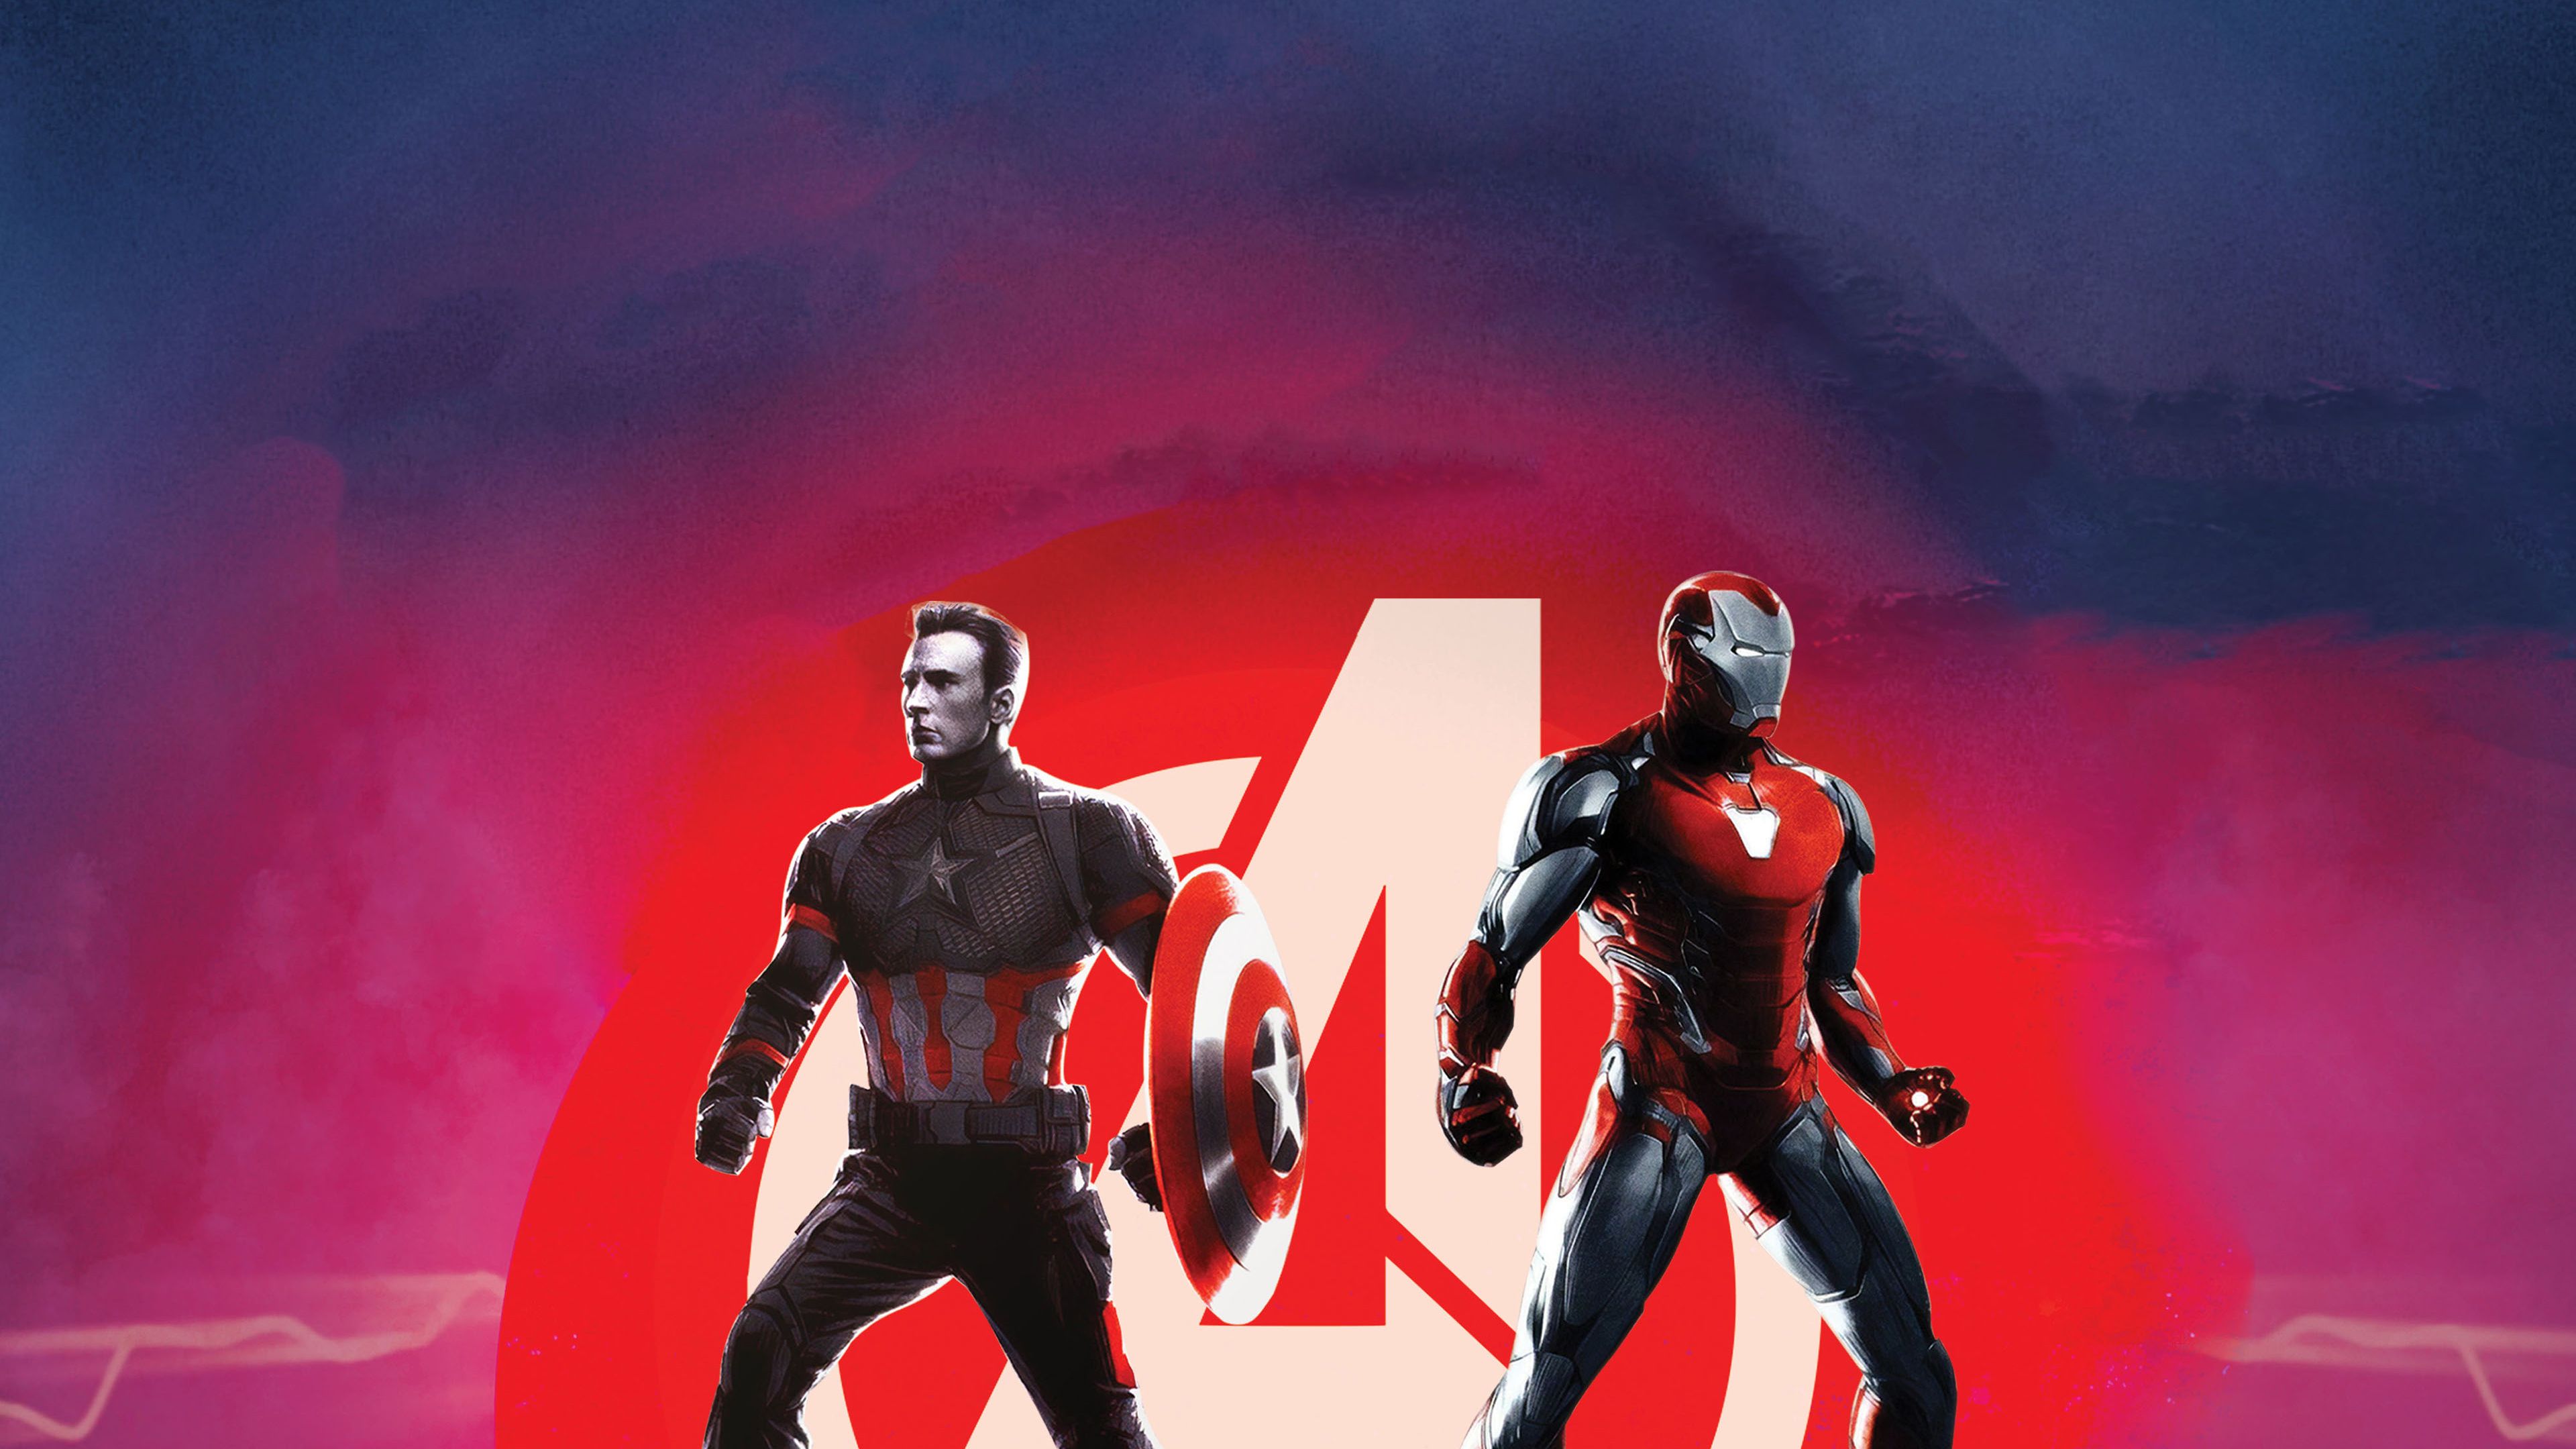 Captain America and Iron Man Avengers Endgame 4K Wallpaper, HD Movies 4K Wallpaper, Image, Photo and Background